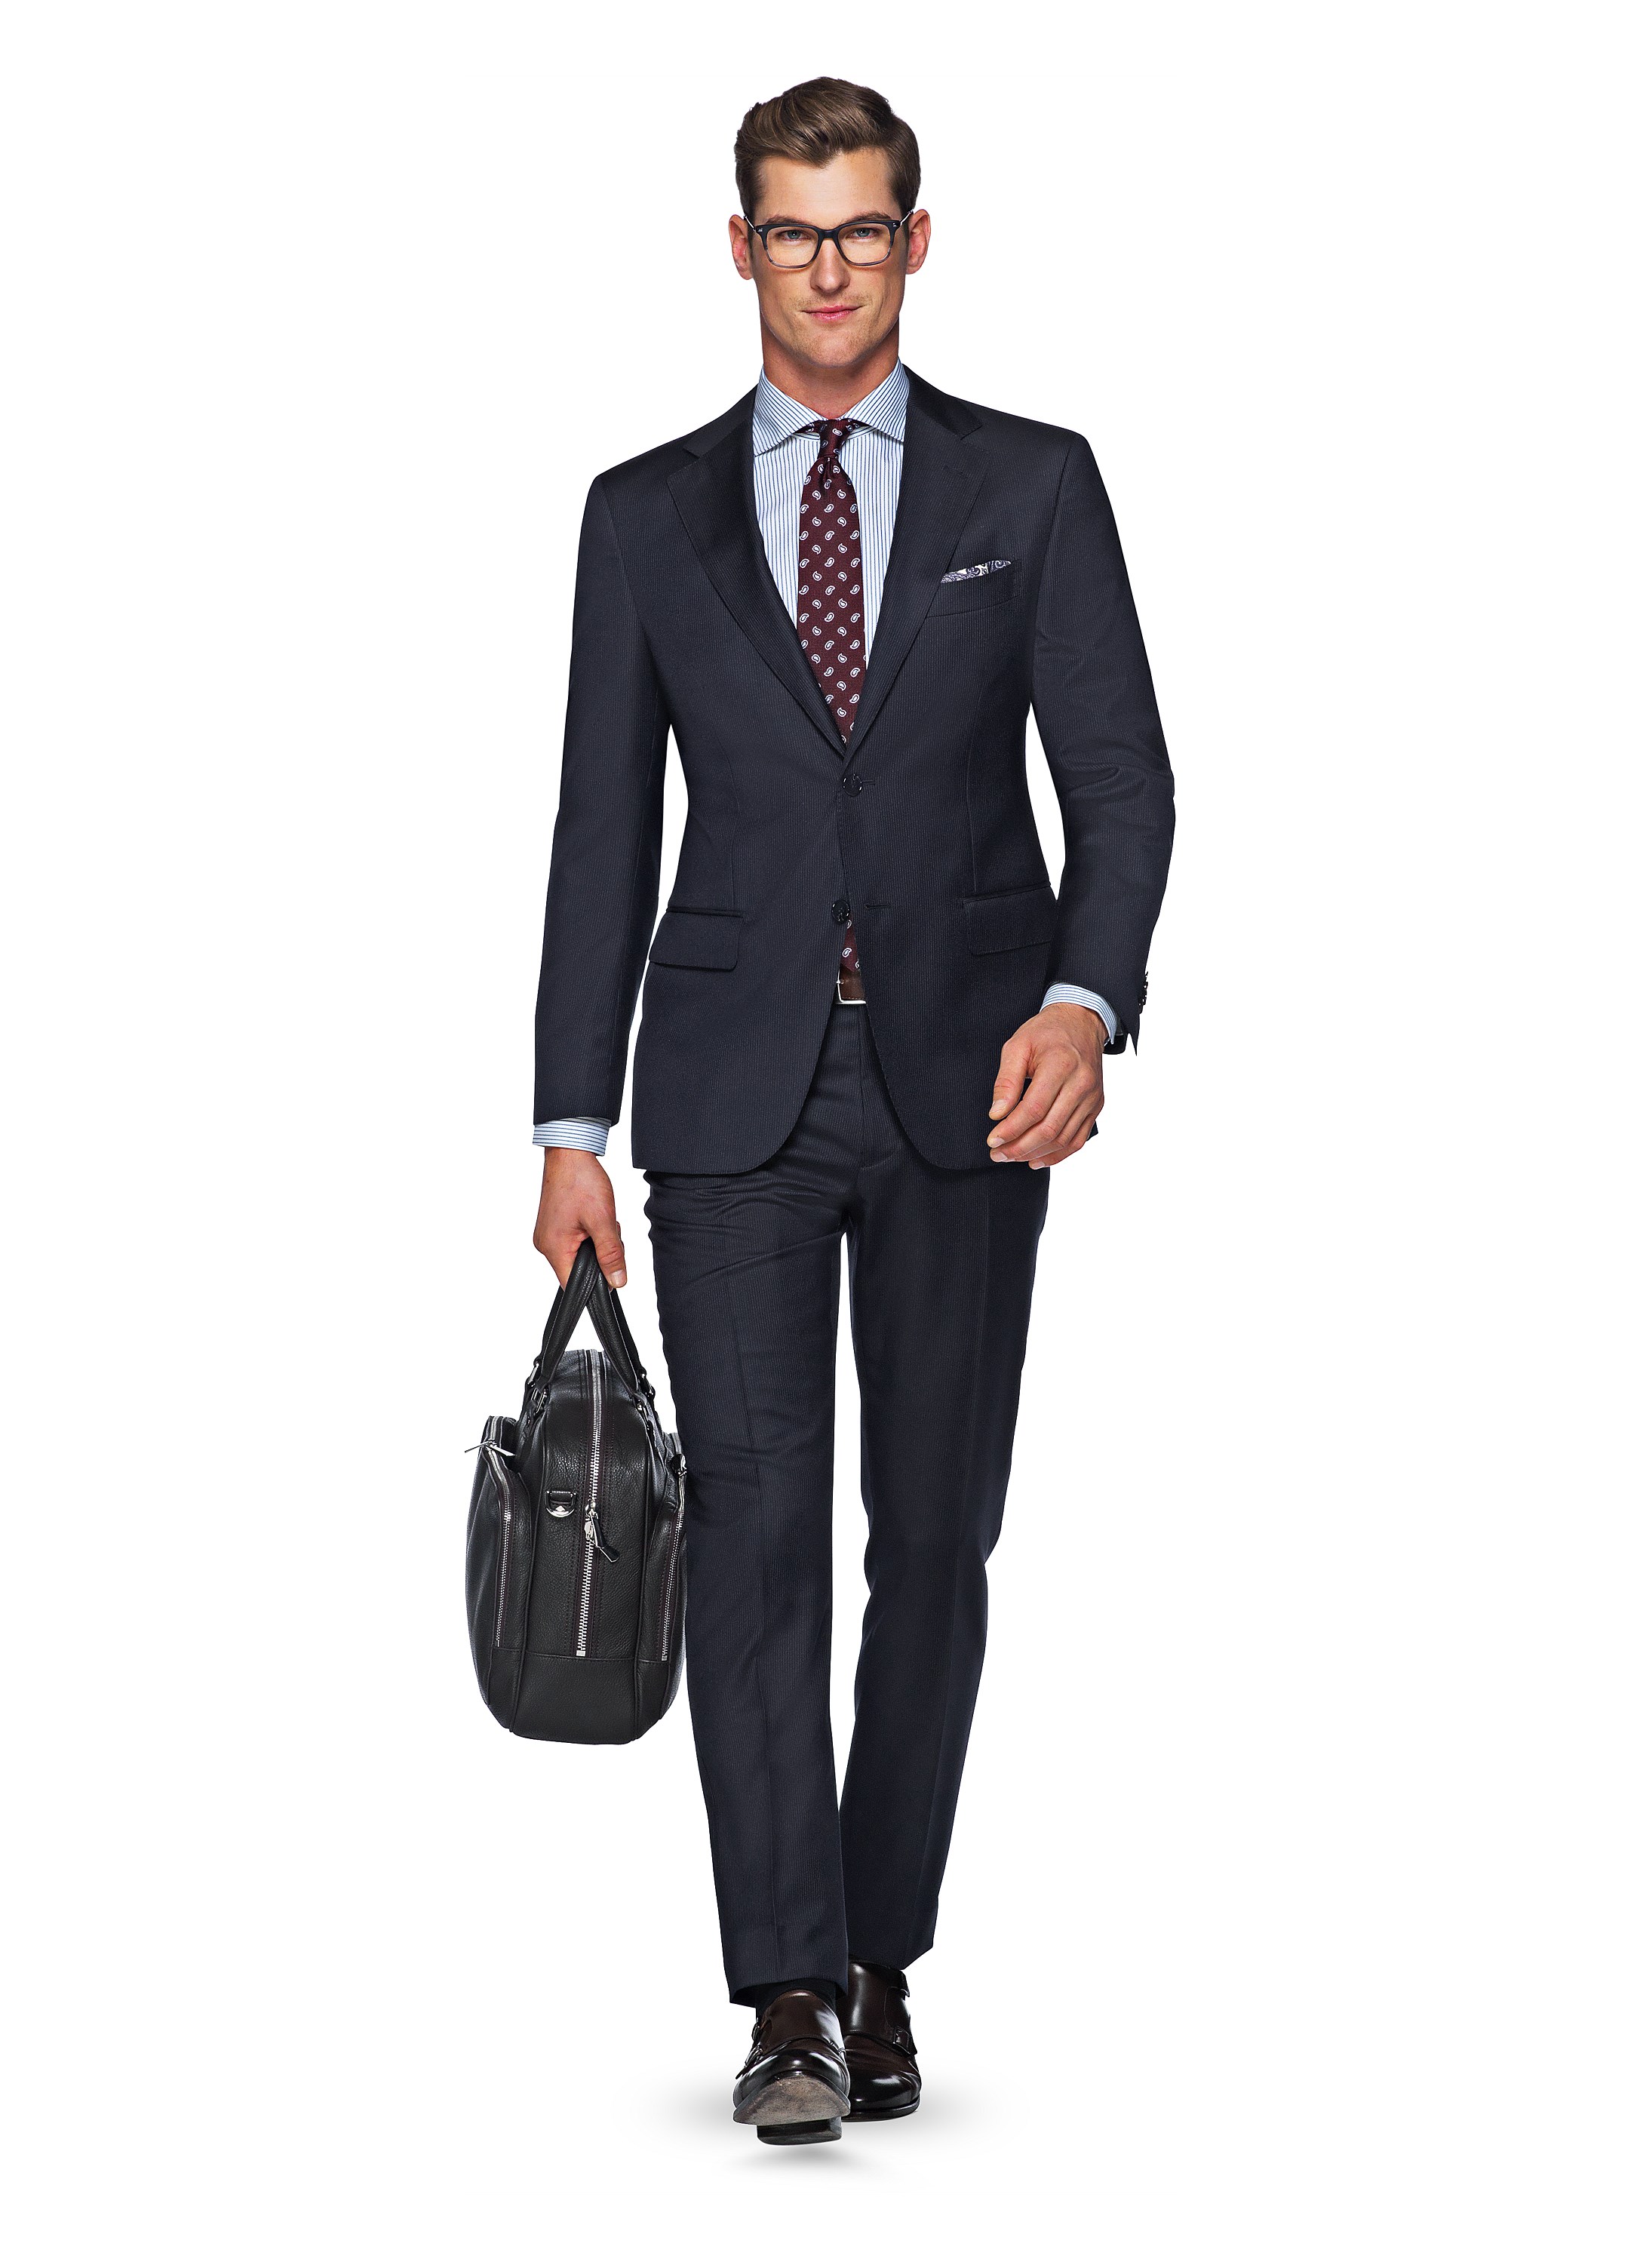 Suits_Navy_Pinstripe_Napoli_P1105-jd_Suitsupply_Online_Store_1.jpg